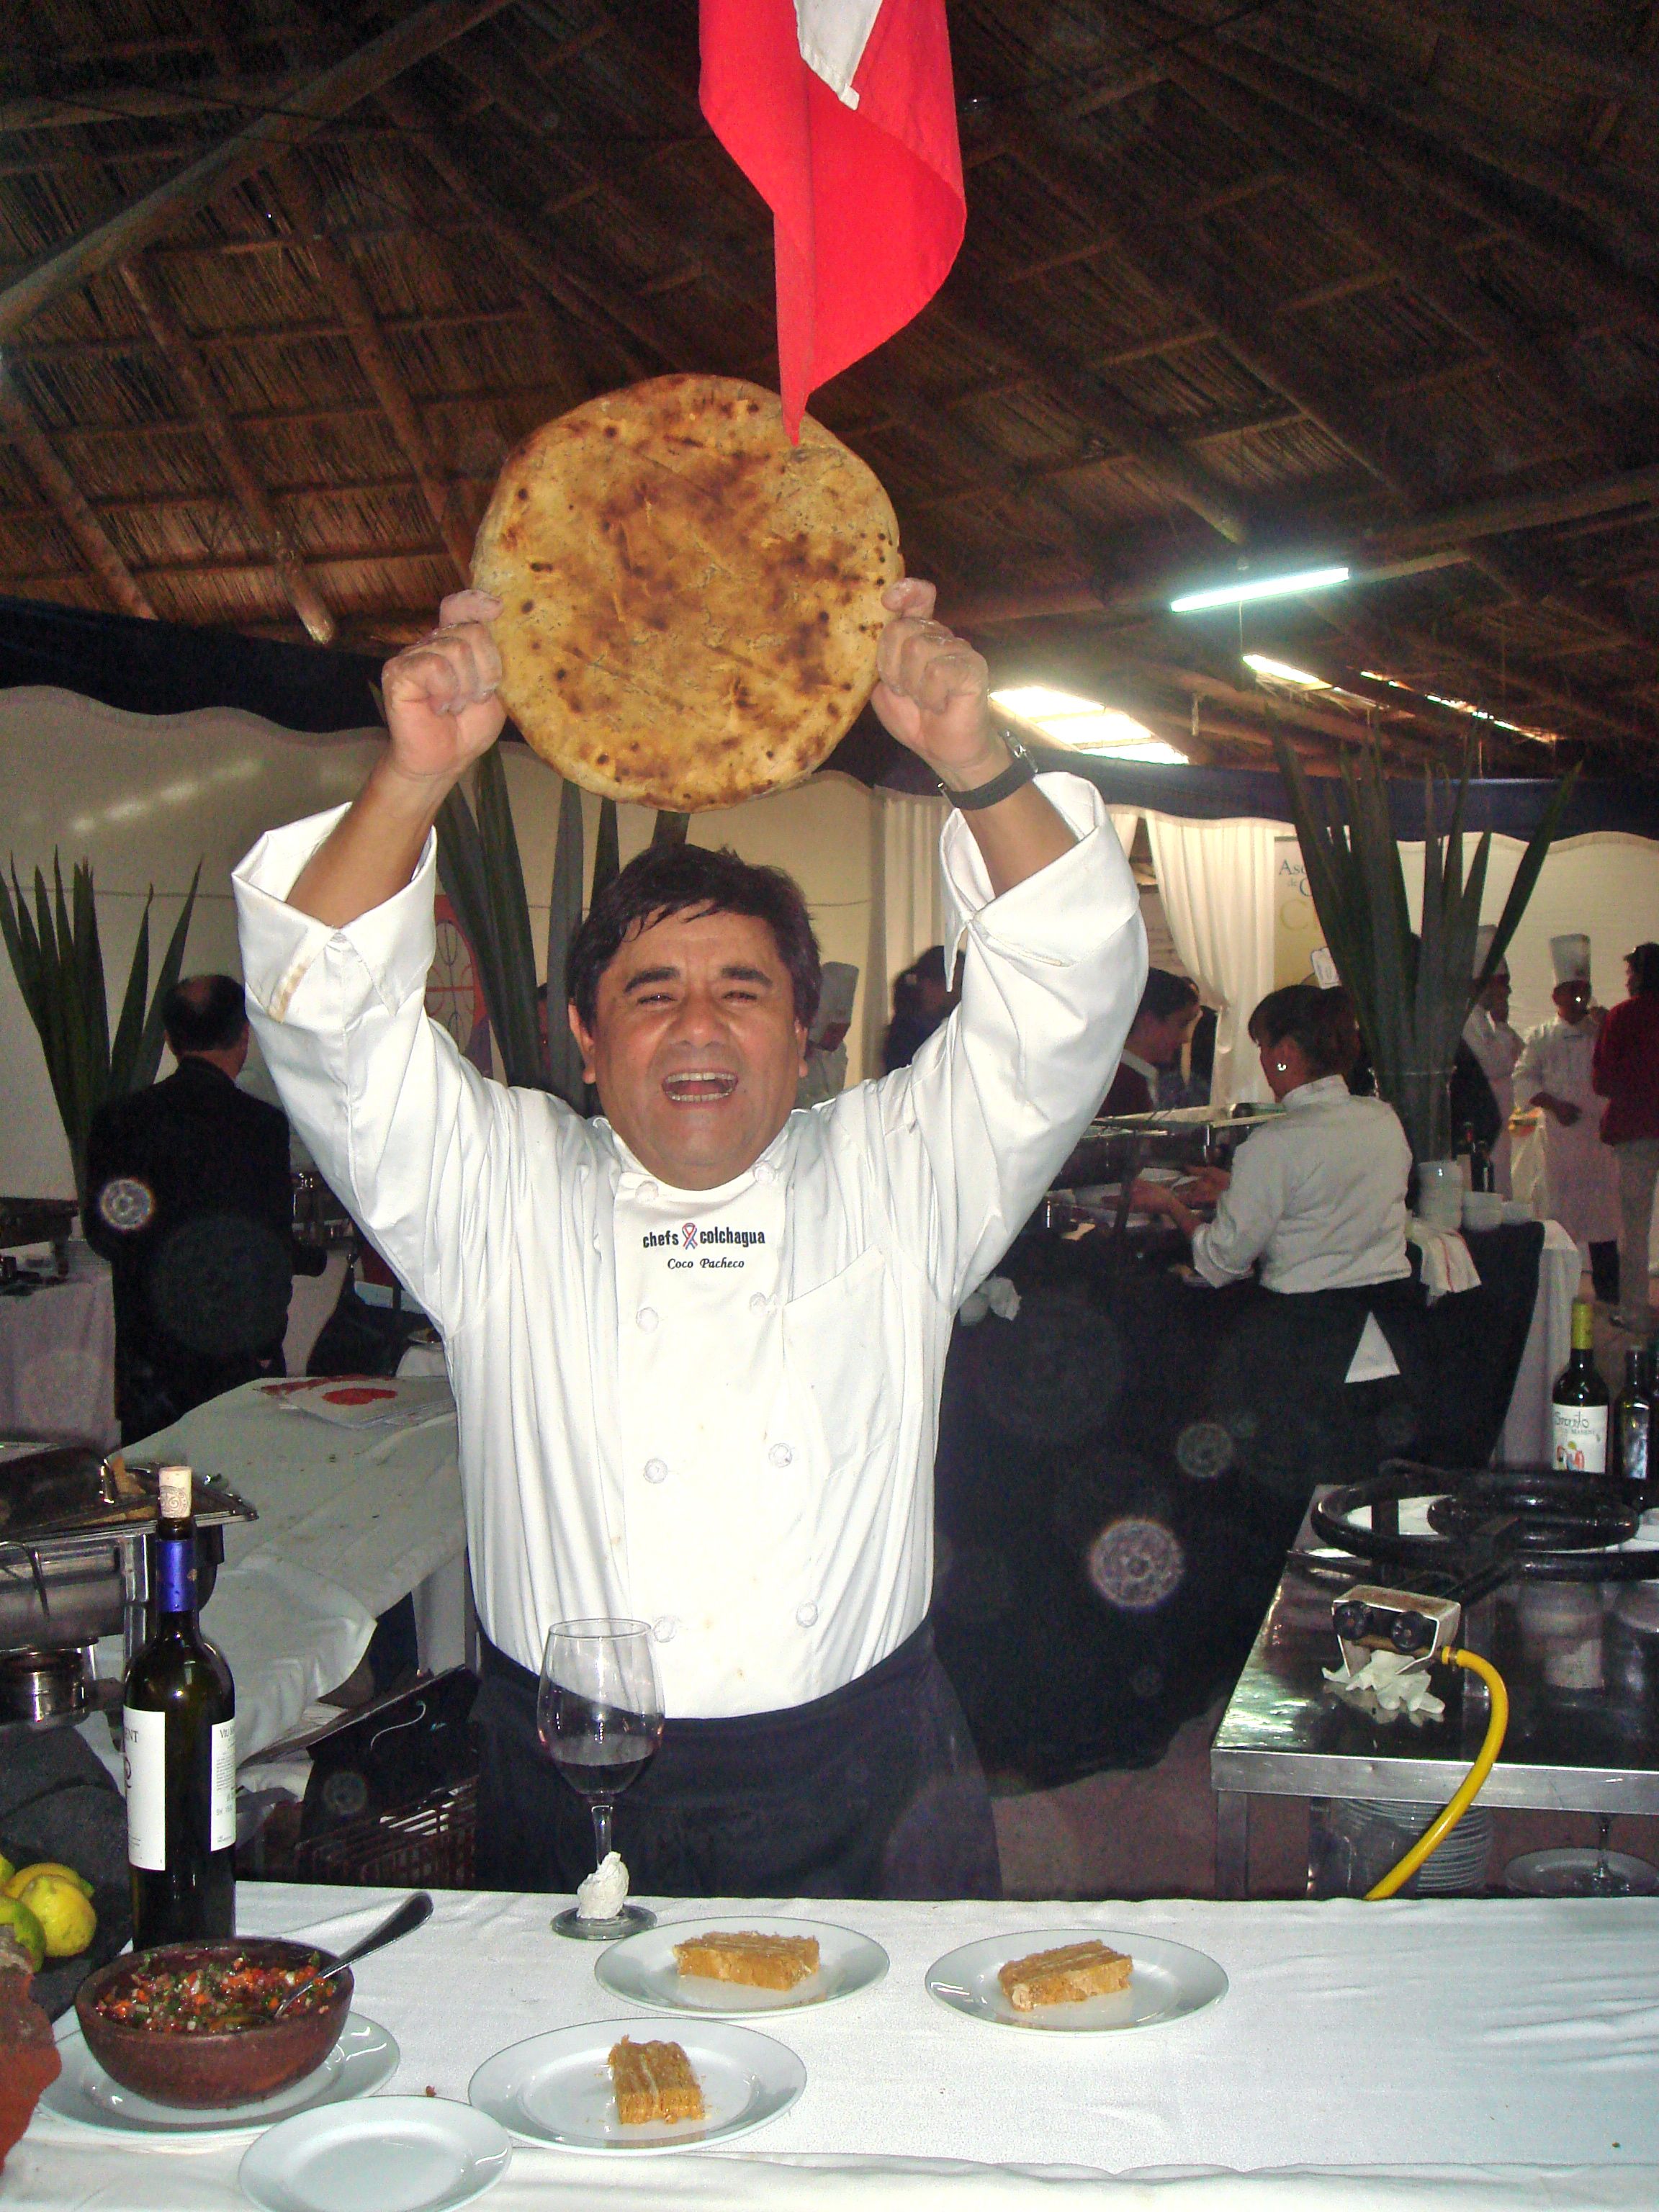 Coco Pacheco and the best tortilla | One Month in Chile